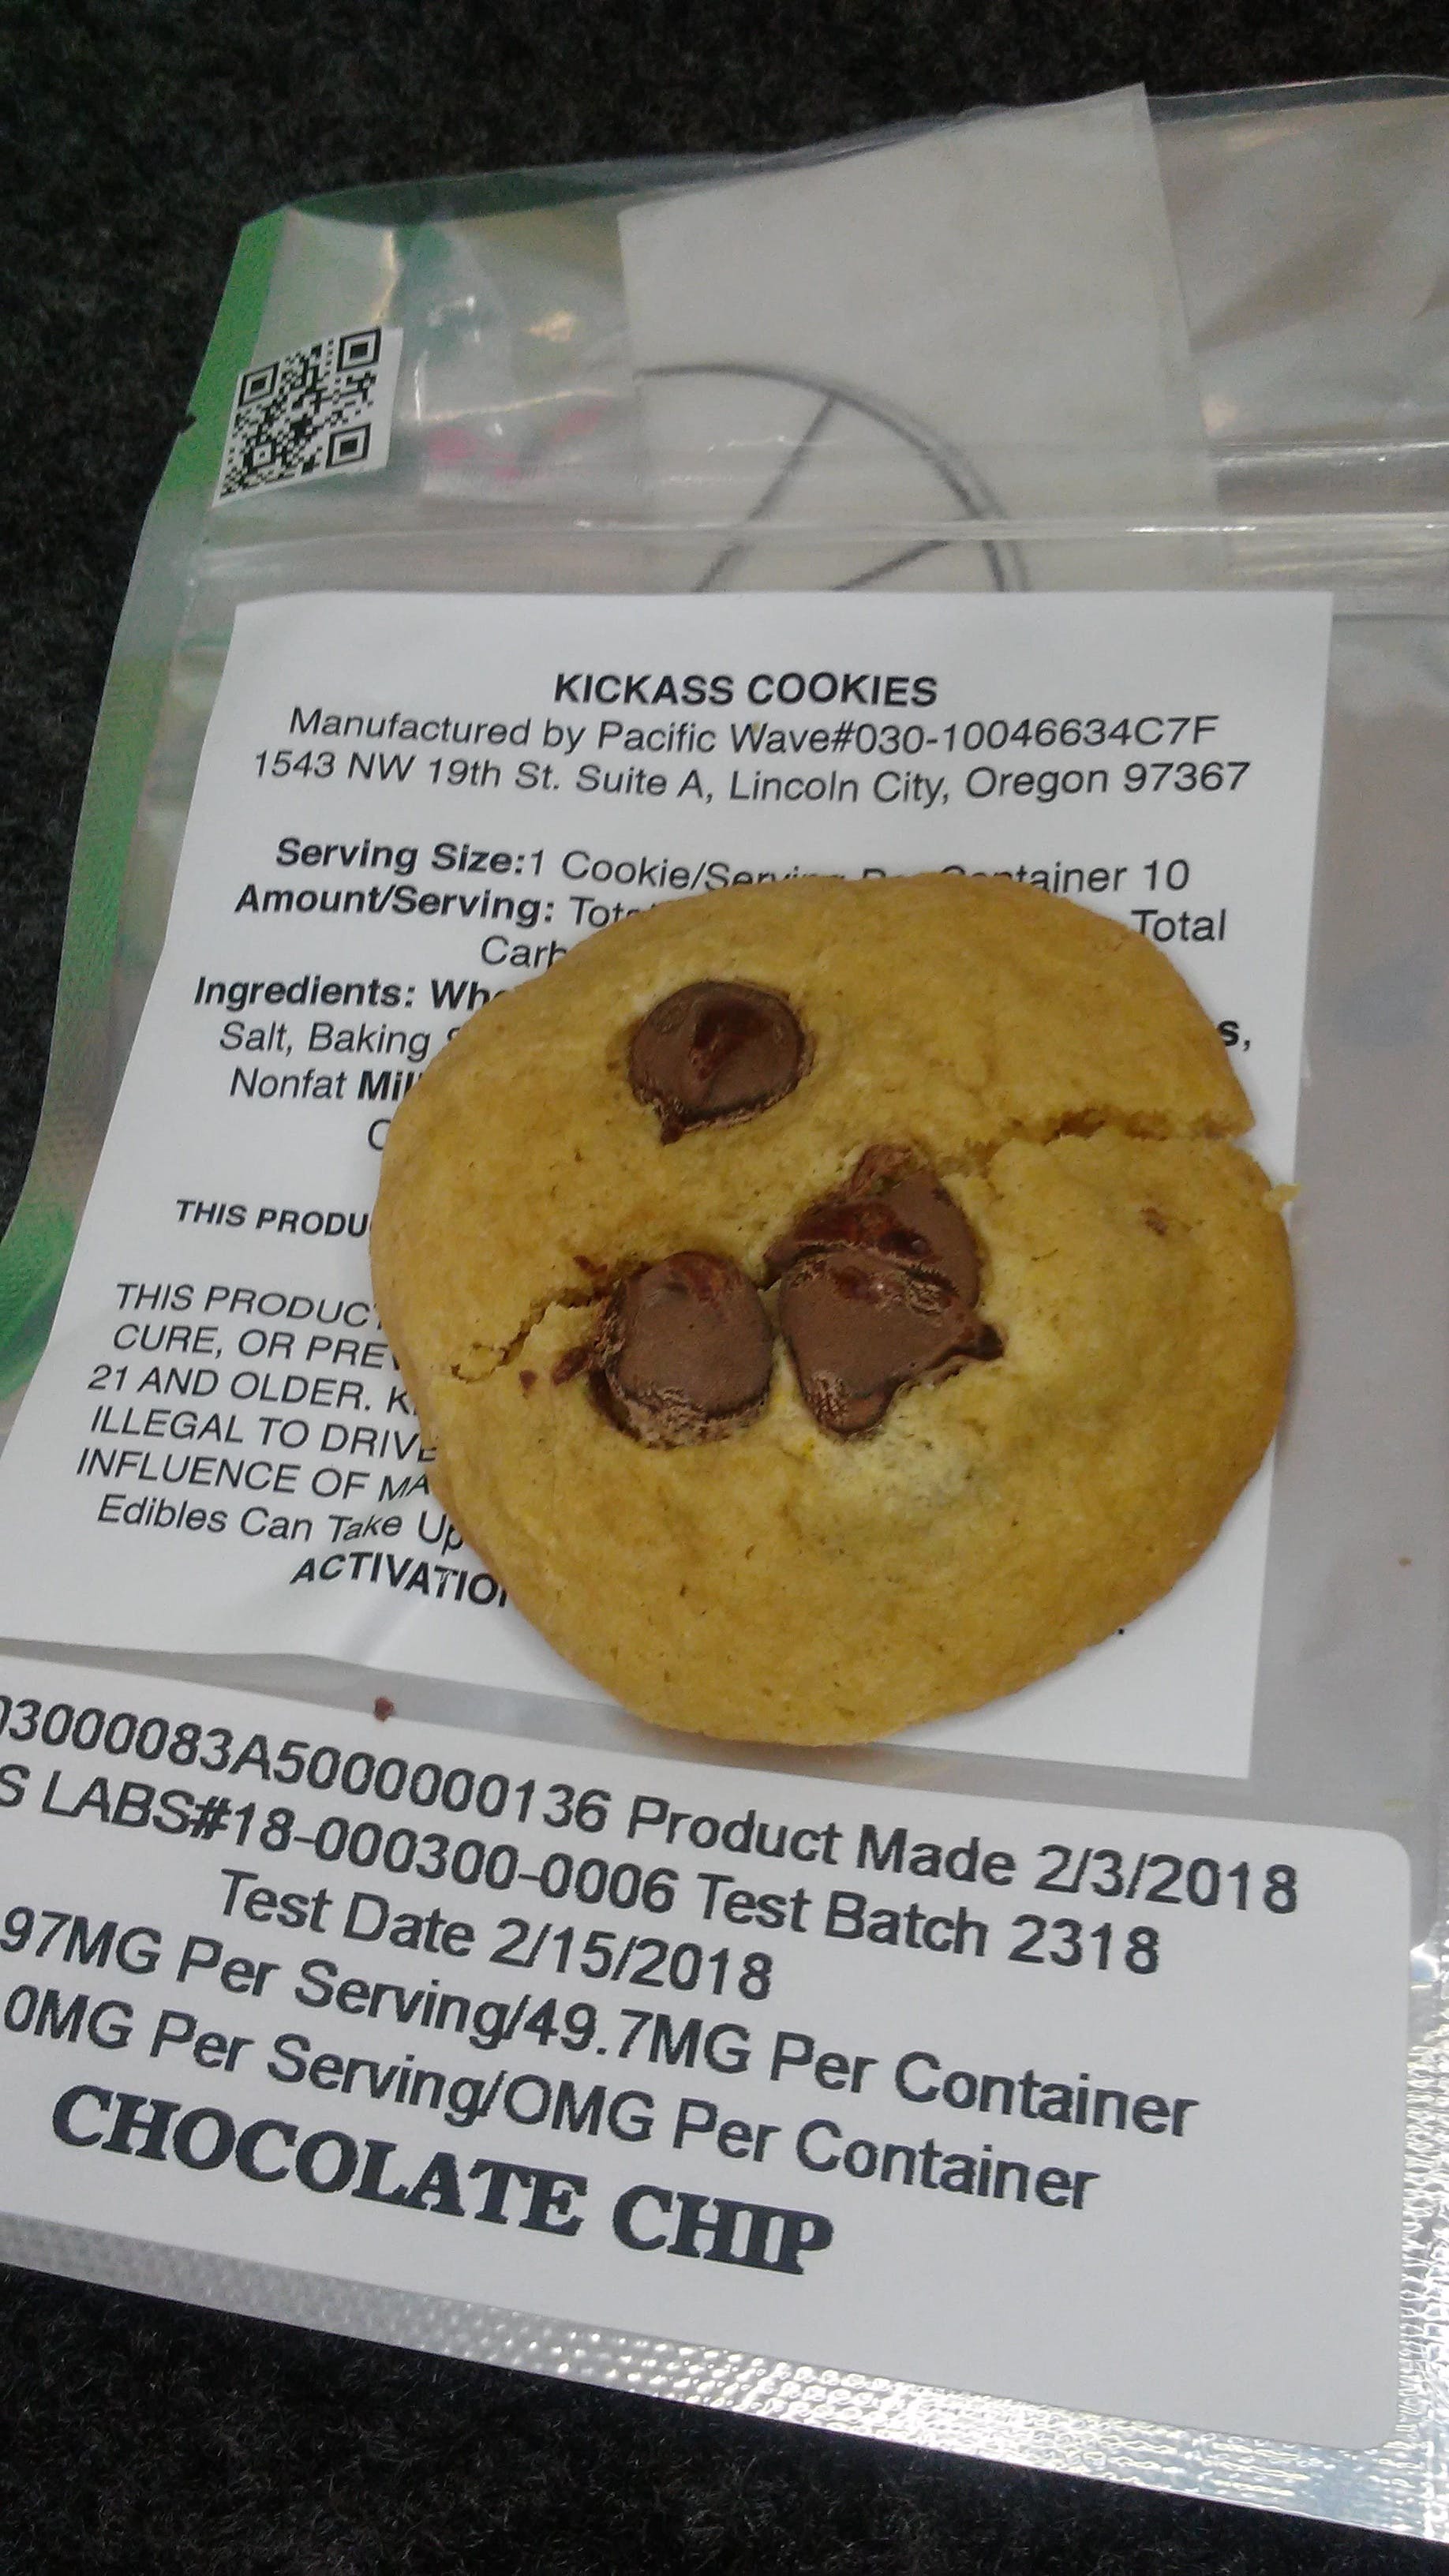 edible-pacific-wave-thc-chocolate-chip-kickass-cookie